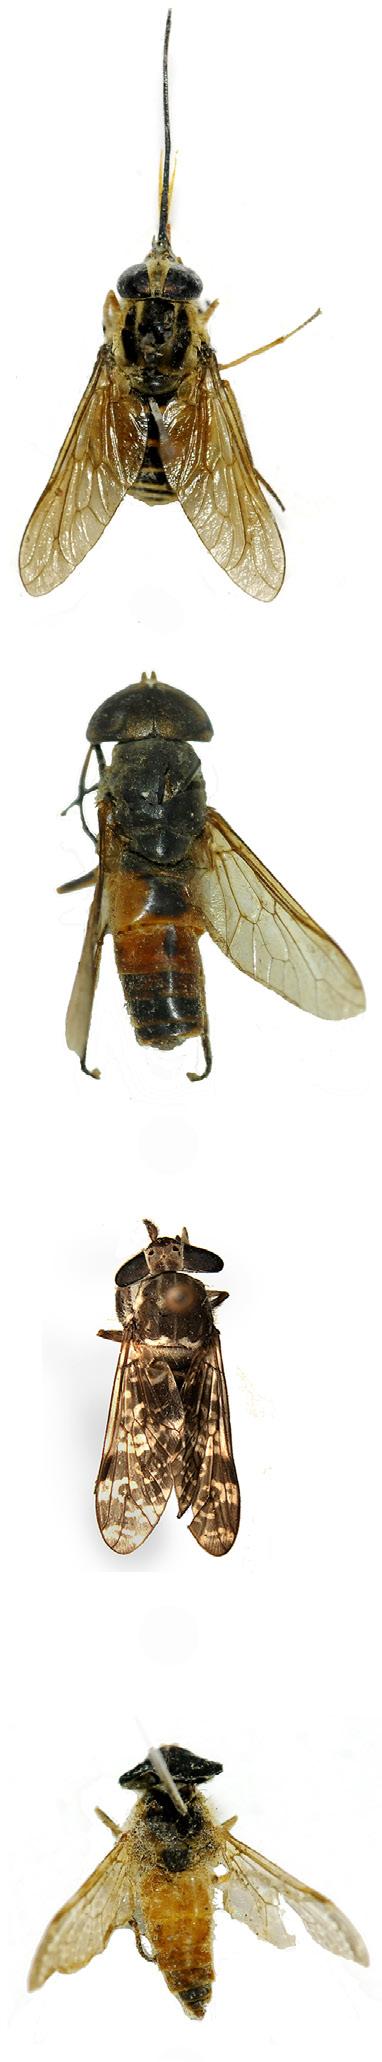 Tabanid flies from Chhattisgarh A. Raha A C A B C D E F G H B D Image 2. Wings of the tabanids identified in the present study.